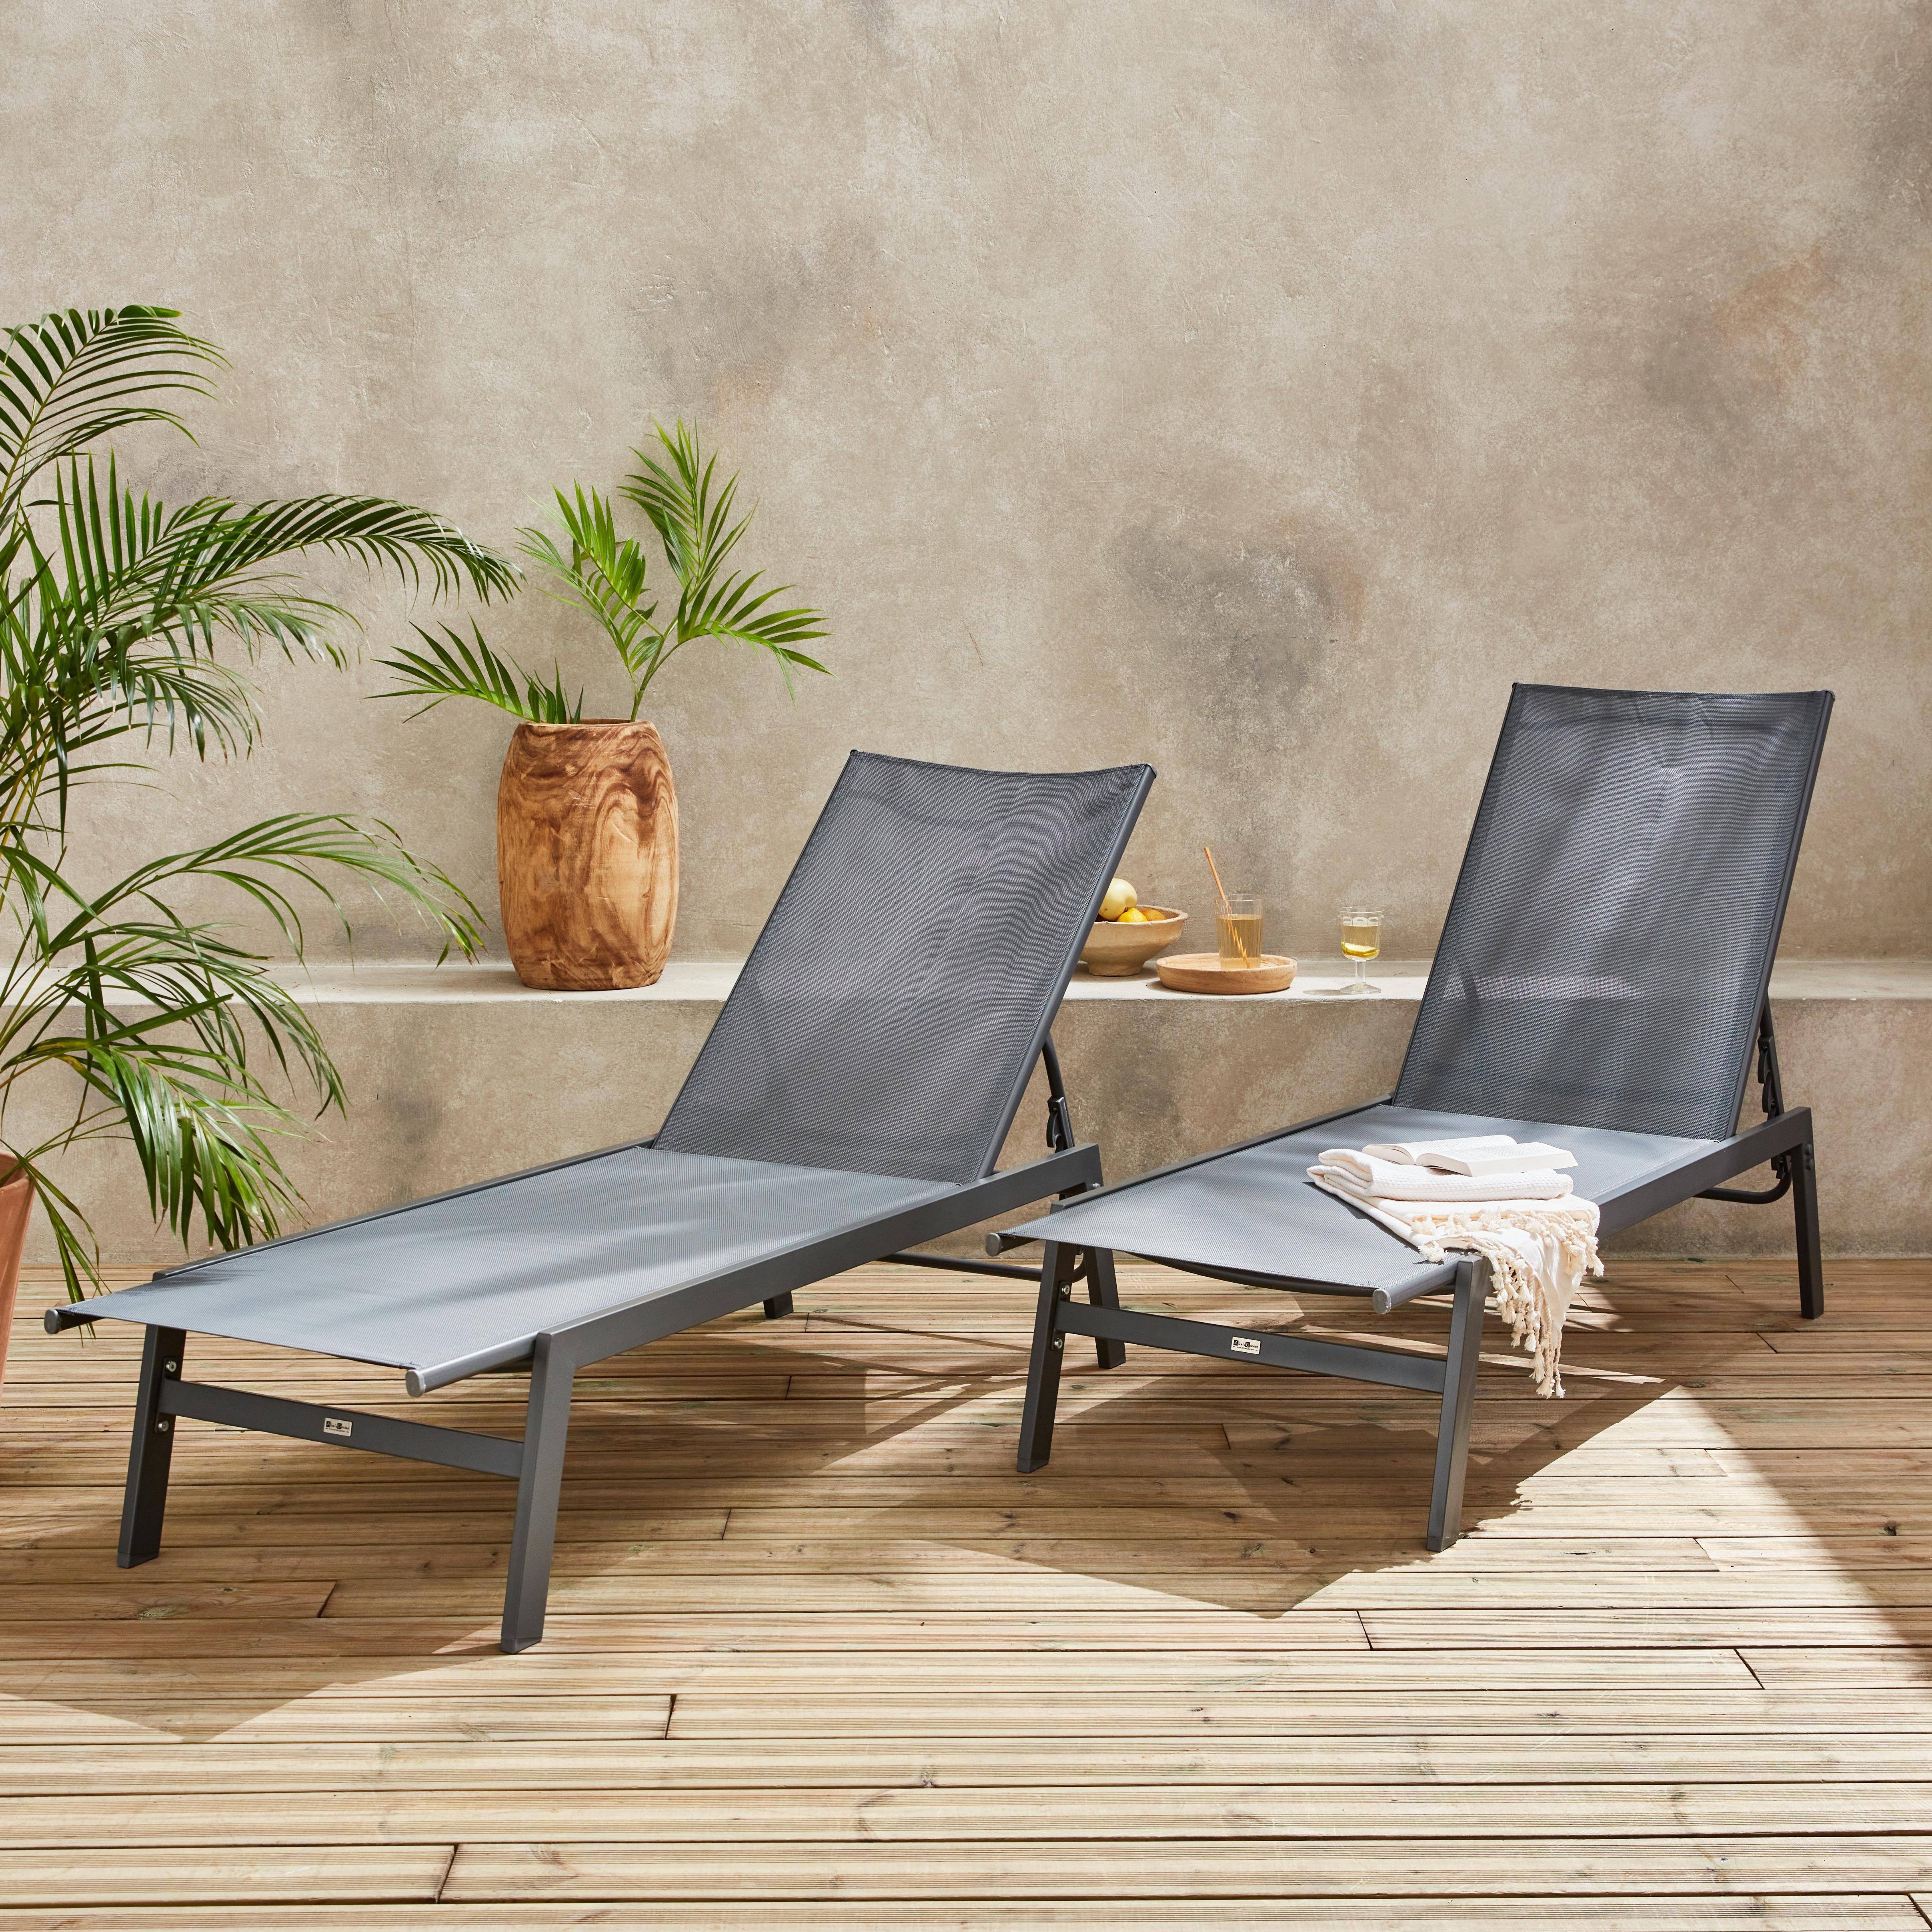 Pair of Textilene and Metal Multi-Position Sun Loungers, Anthracite Photo1